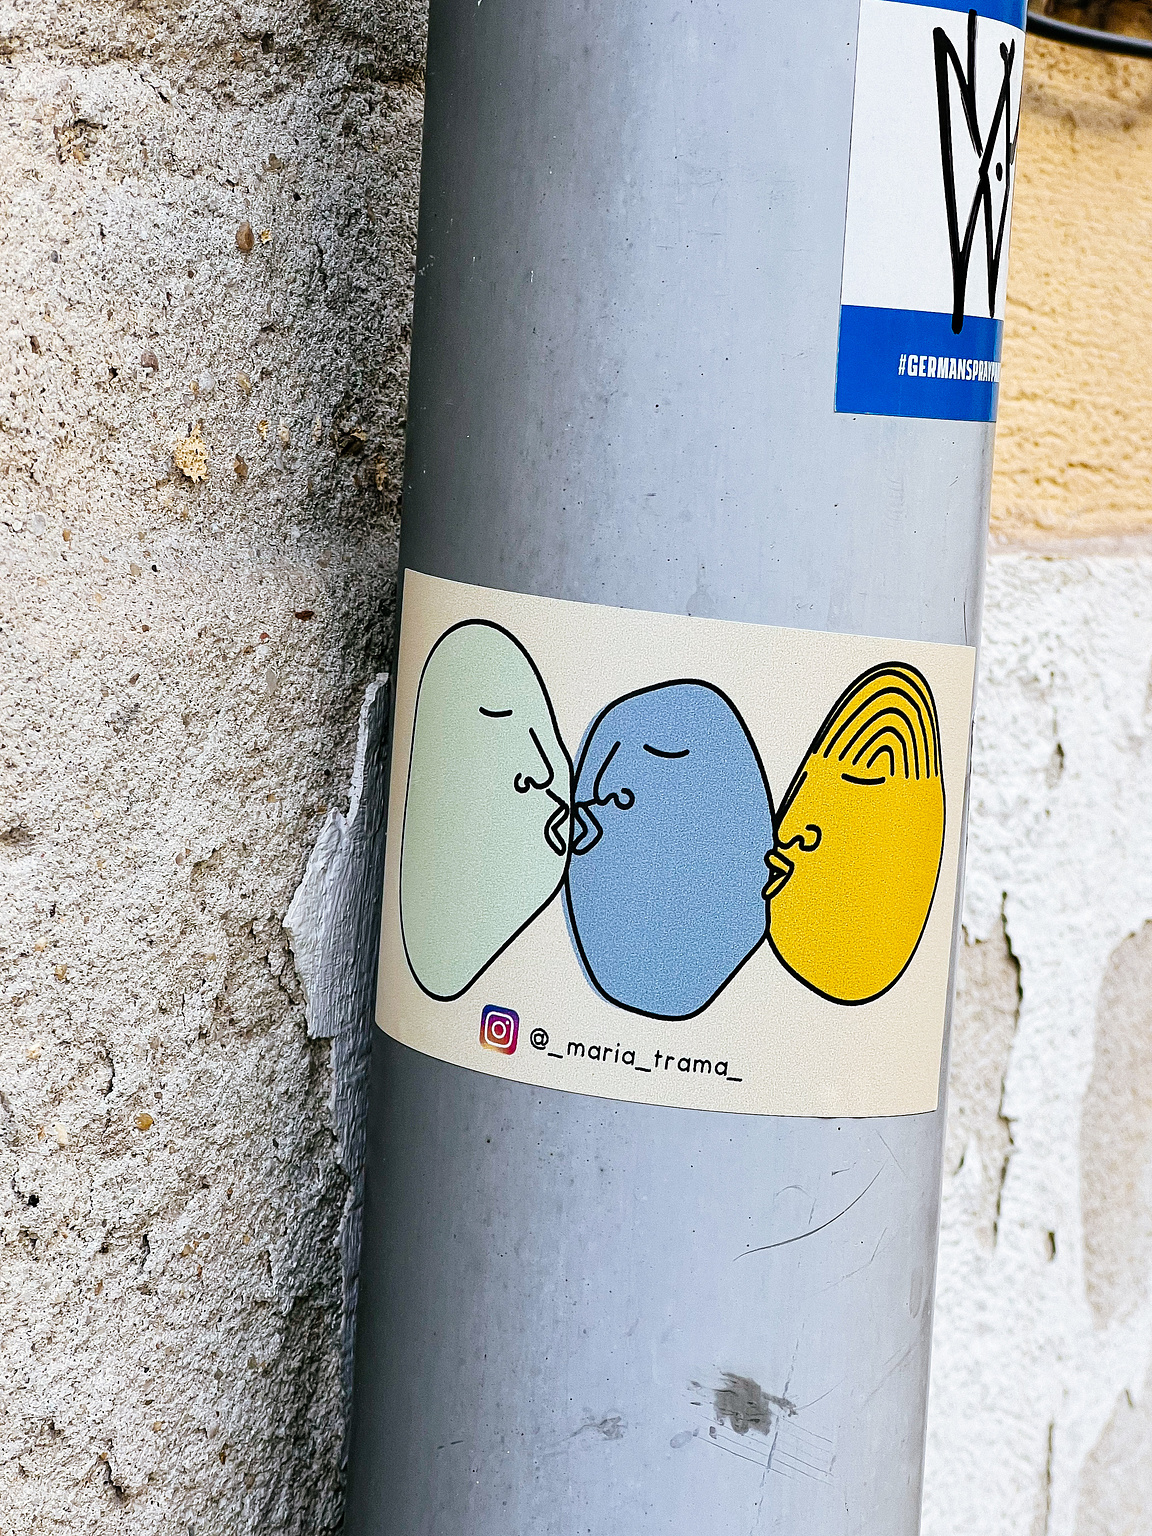 Three stylized faces in primary colors kiss each other on a sticker, affixed to a gray pole with rough texture. Instagram handle @_maria_trama_ is visible.